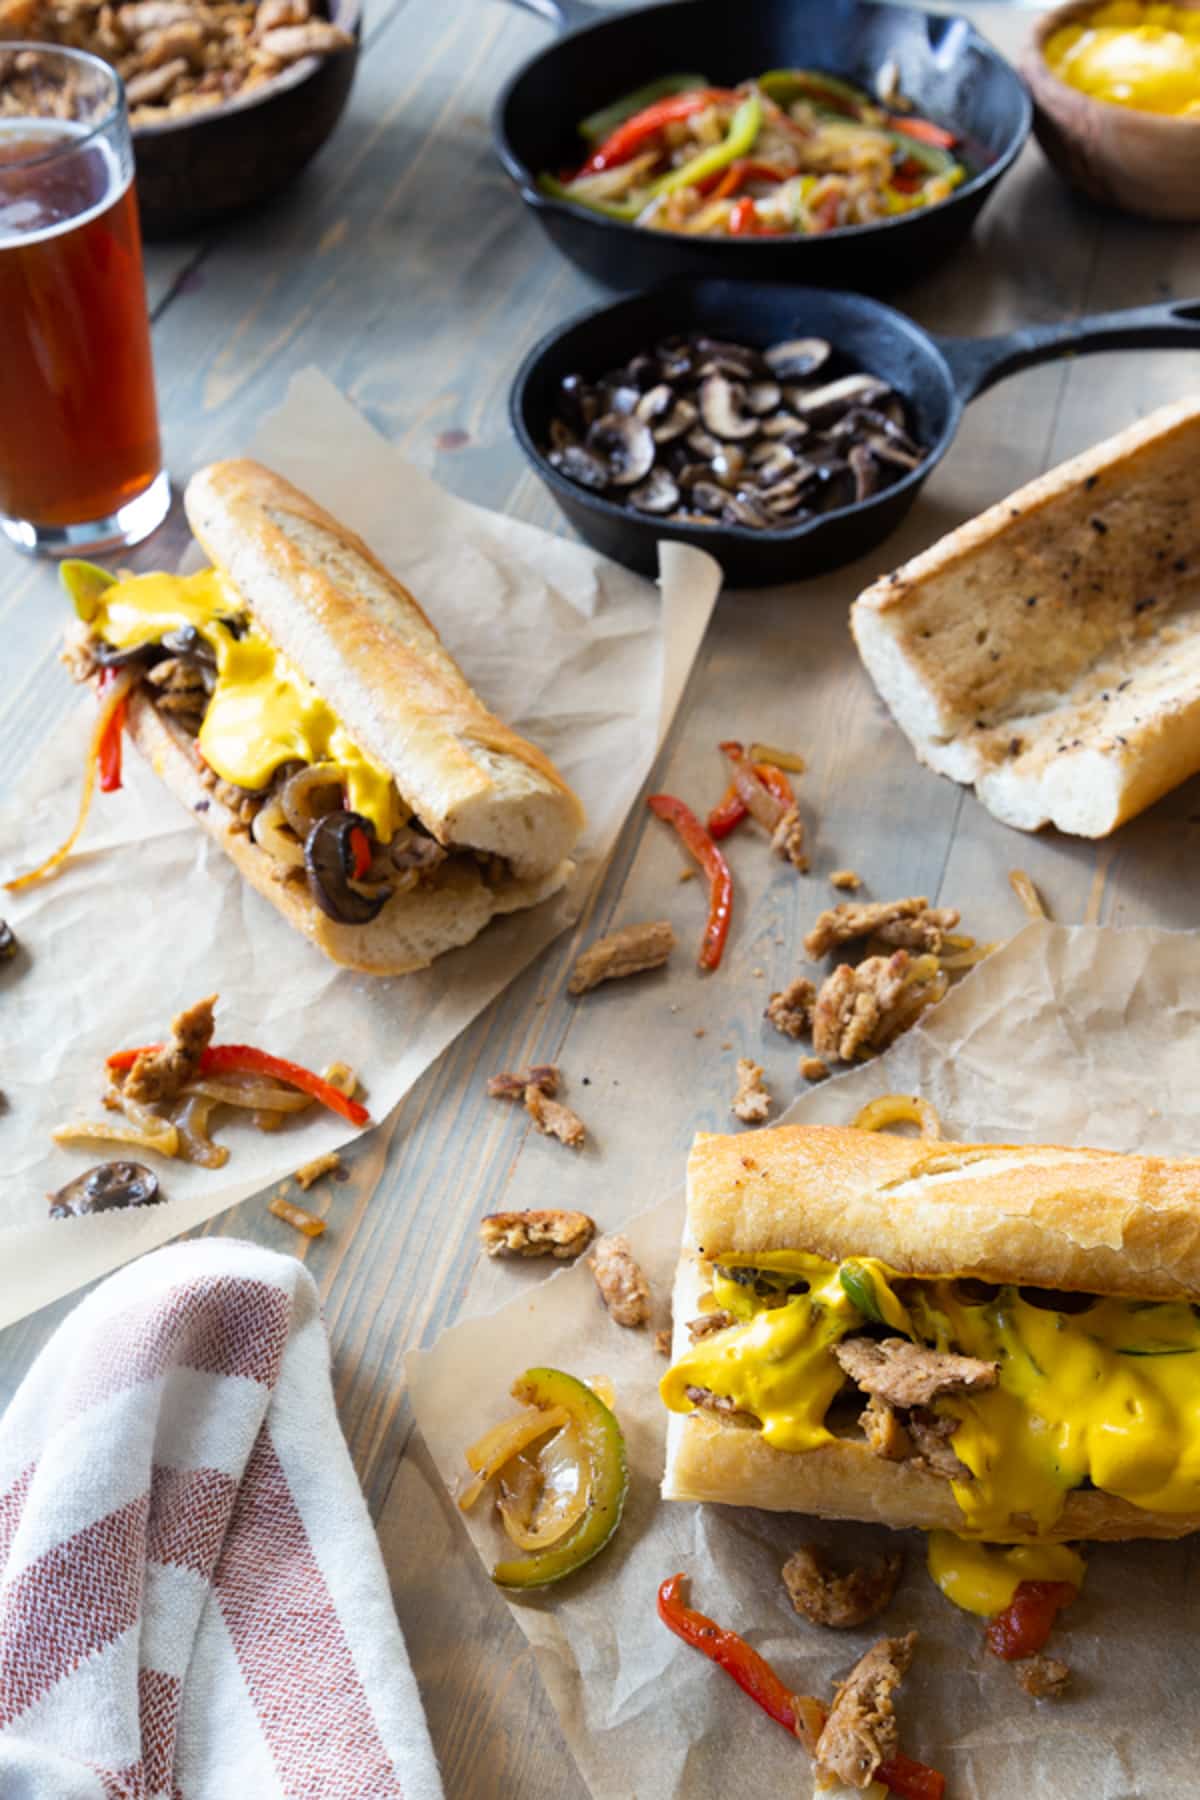 Vegan Philly cheesesteak sandwiches and pans of mushrooms and peppers.